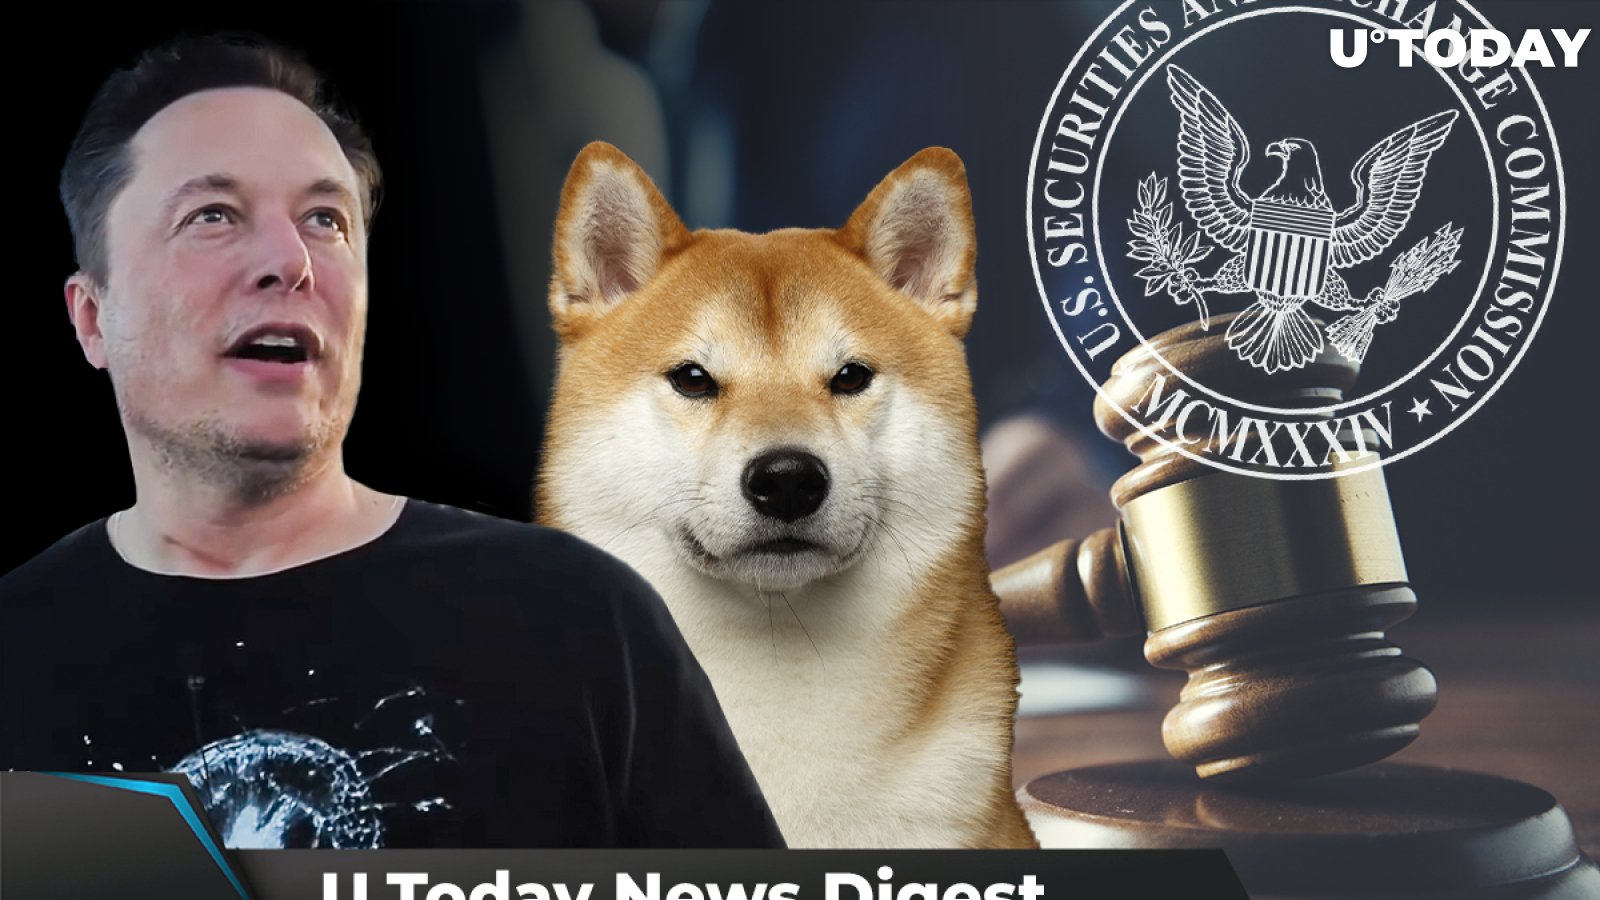 Elon Musk Shiba Inu Photo Sparks over 90,000 tweets, XRP Holders to Help Court: Crypto News Digest by U.Today